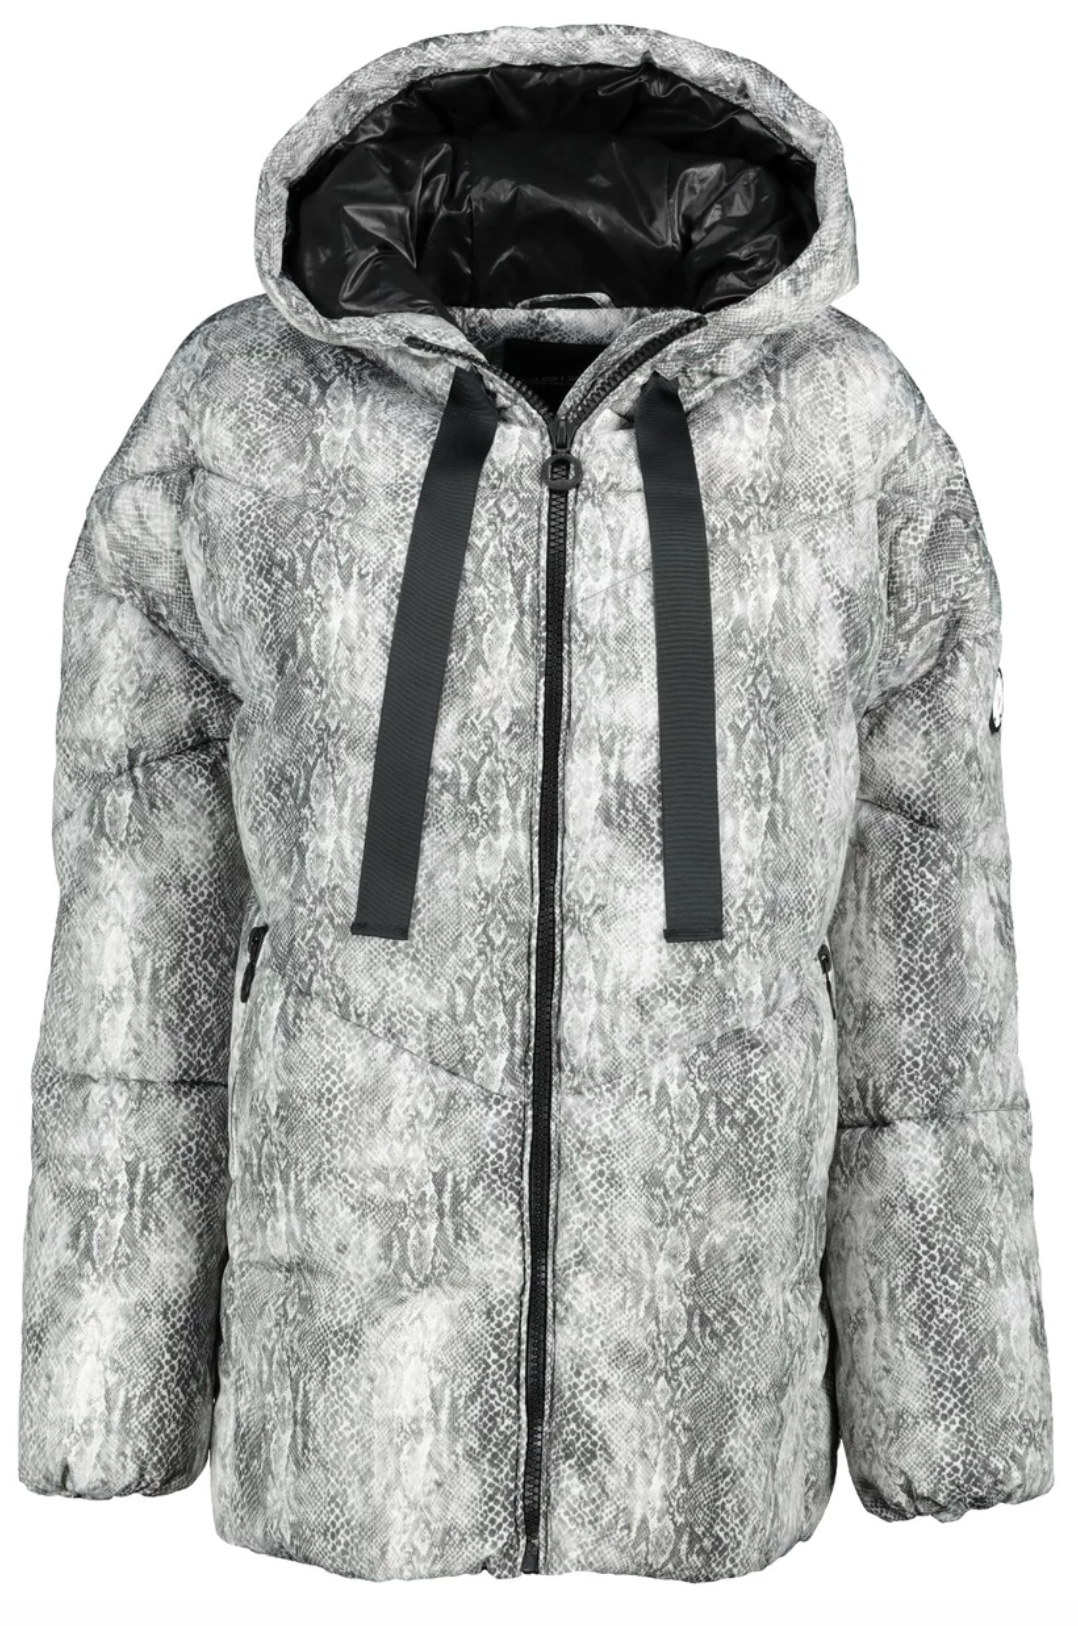 BELLE-PY Midweight Printed Puffer